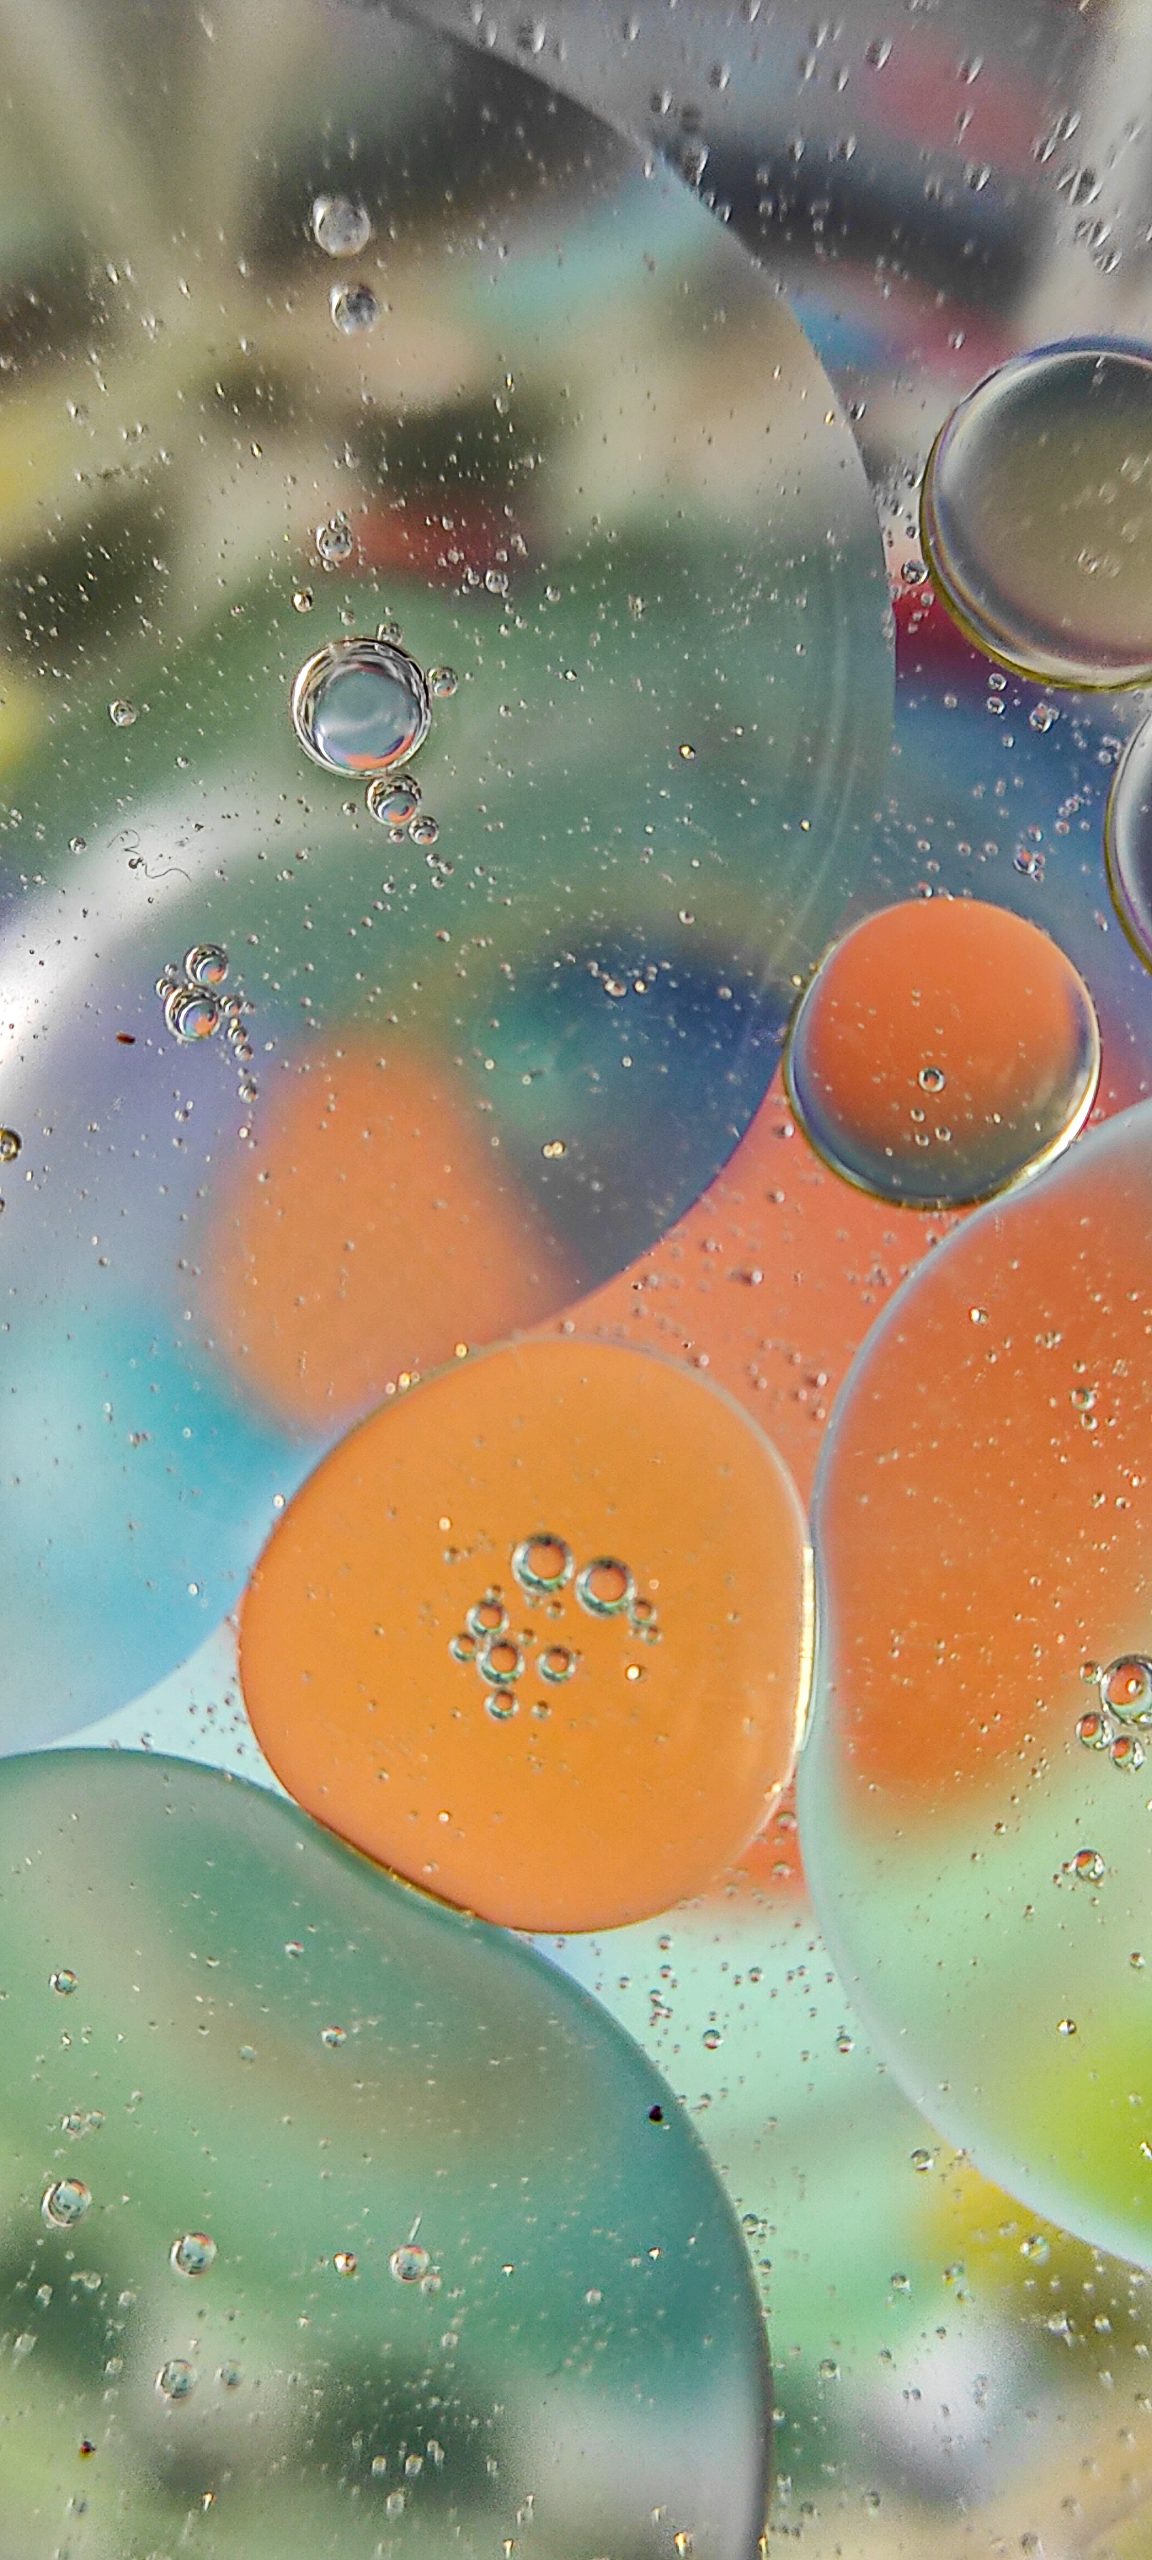 Oily bubbles in water